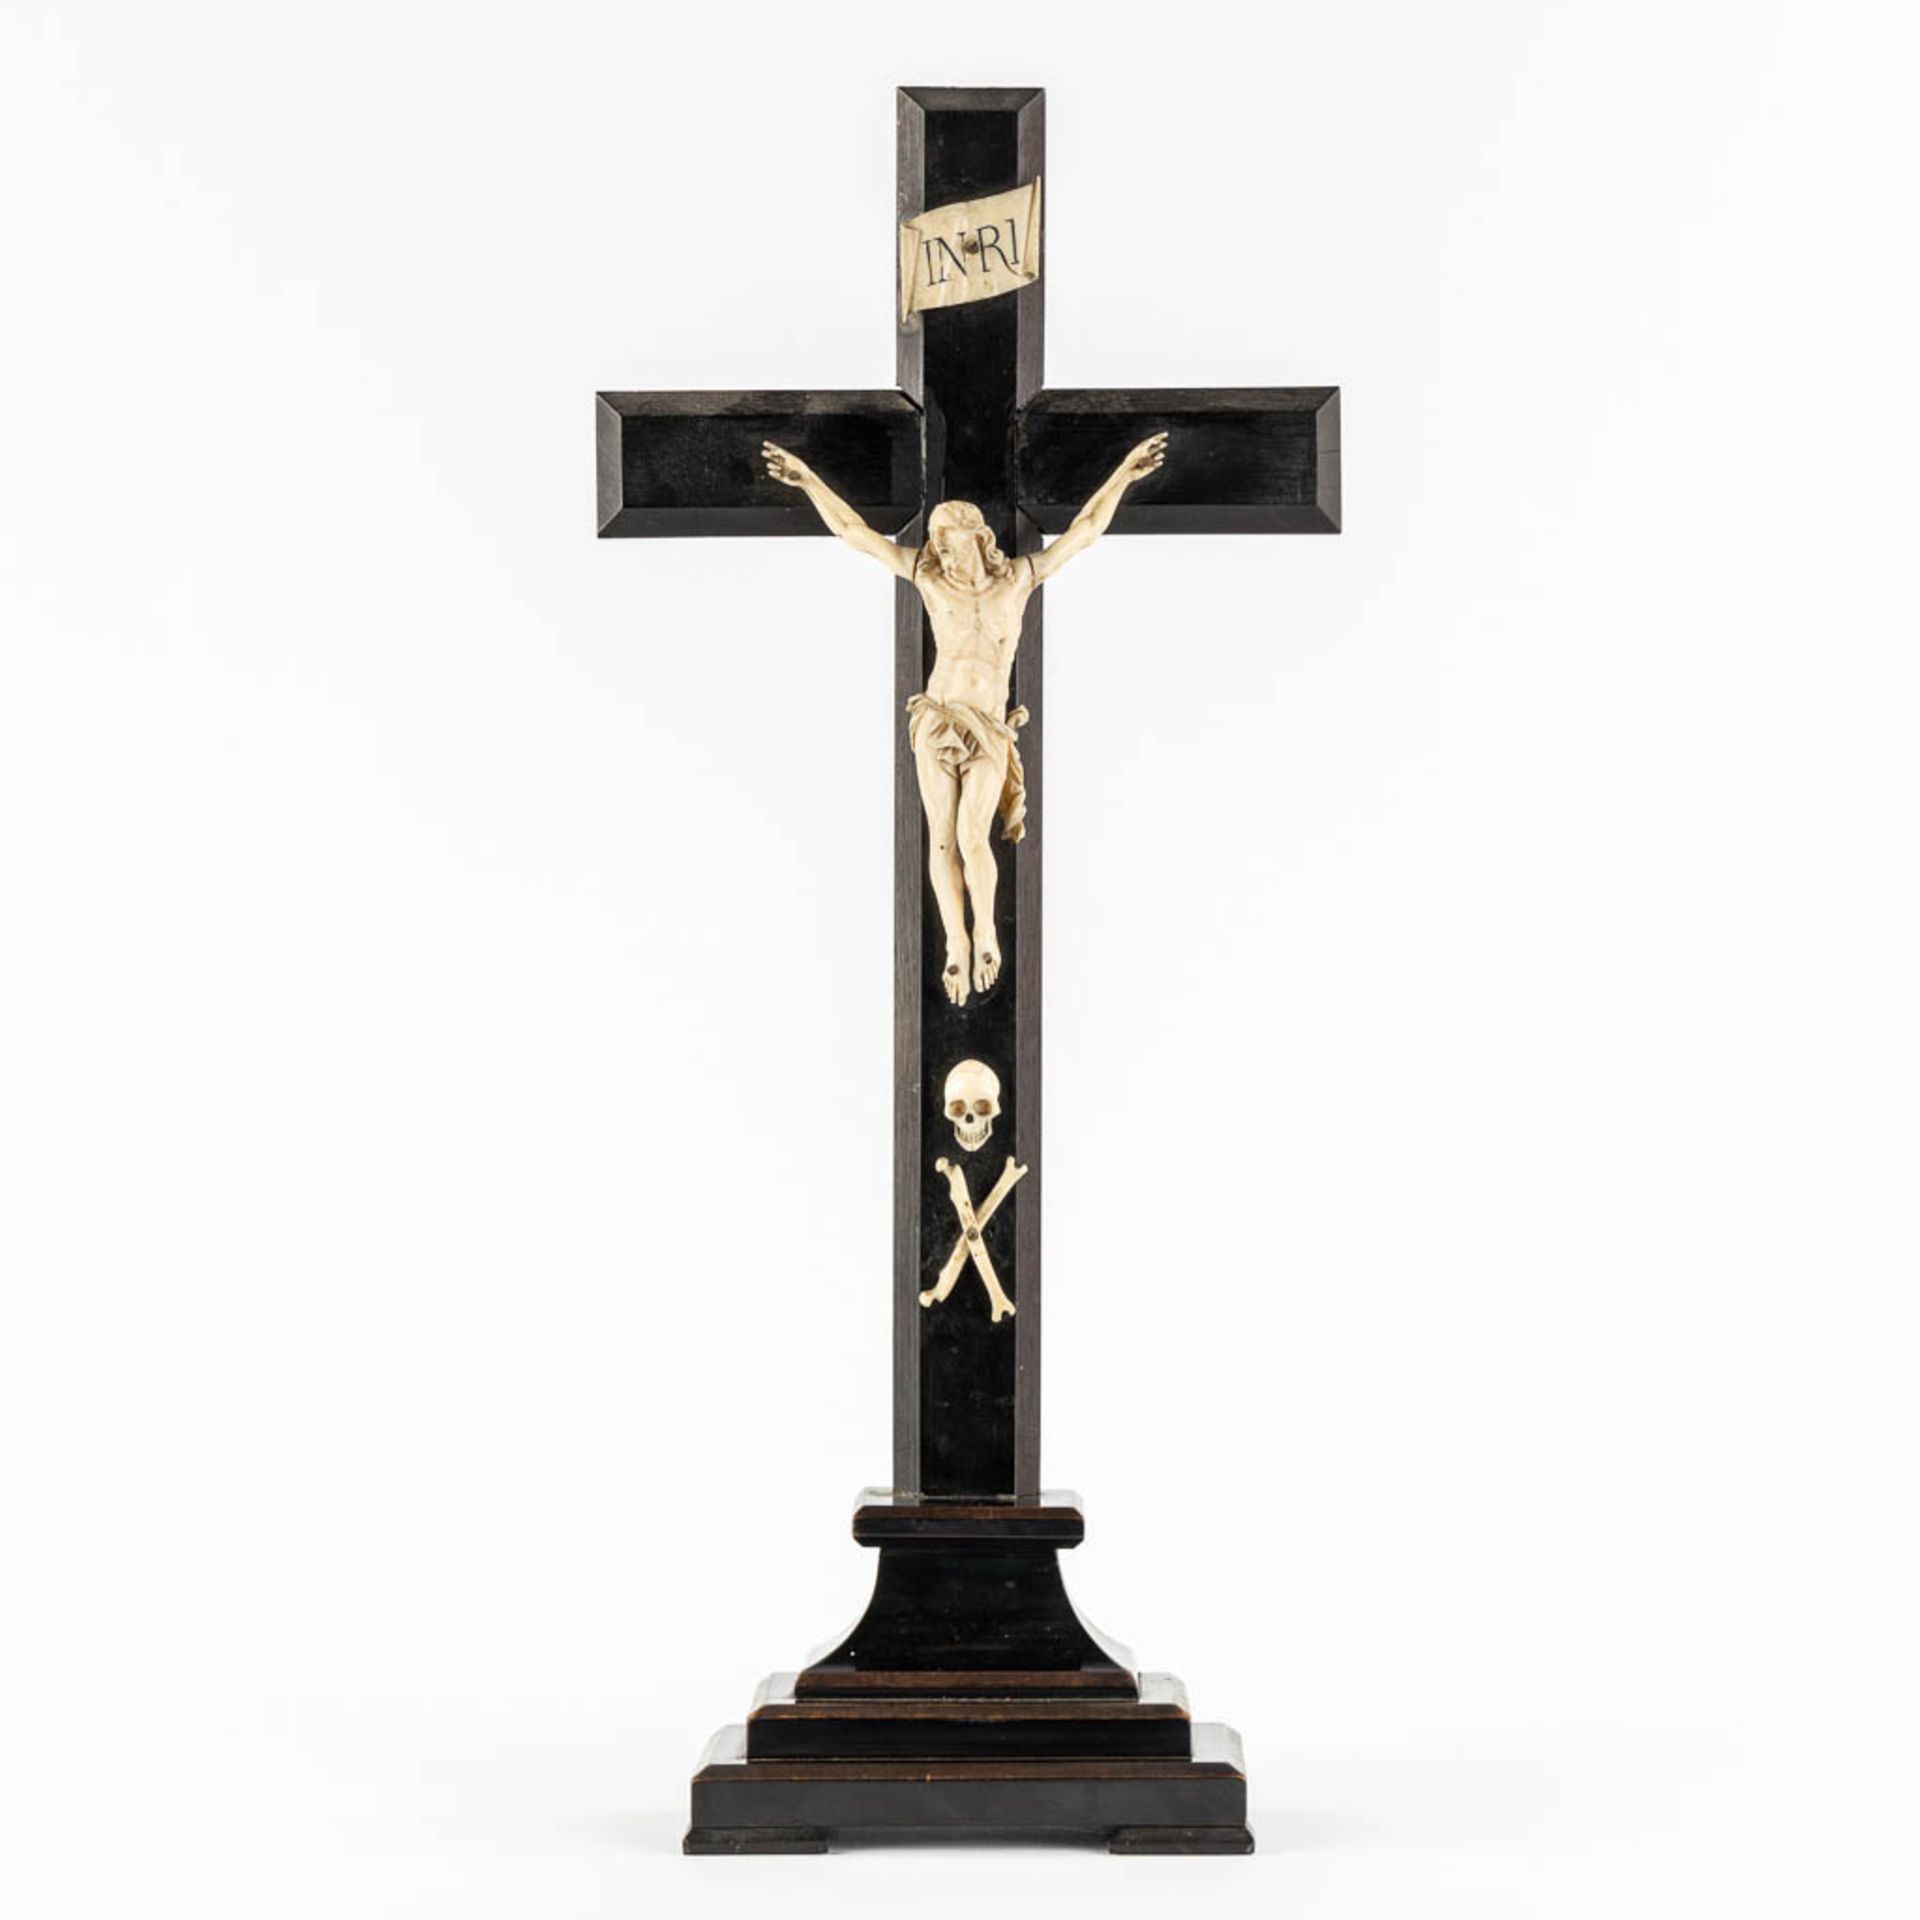 An antique Corpus Christi mounted on an ebonised wood crucifix, Ivory sculpture, 19th C. (L:9,5 x W: